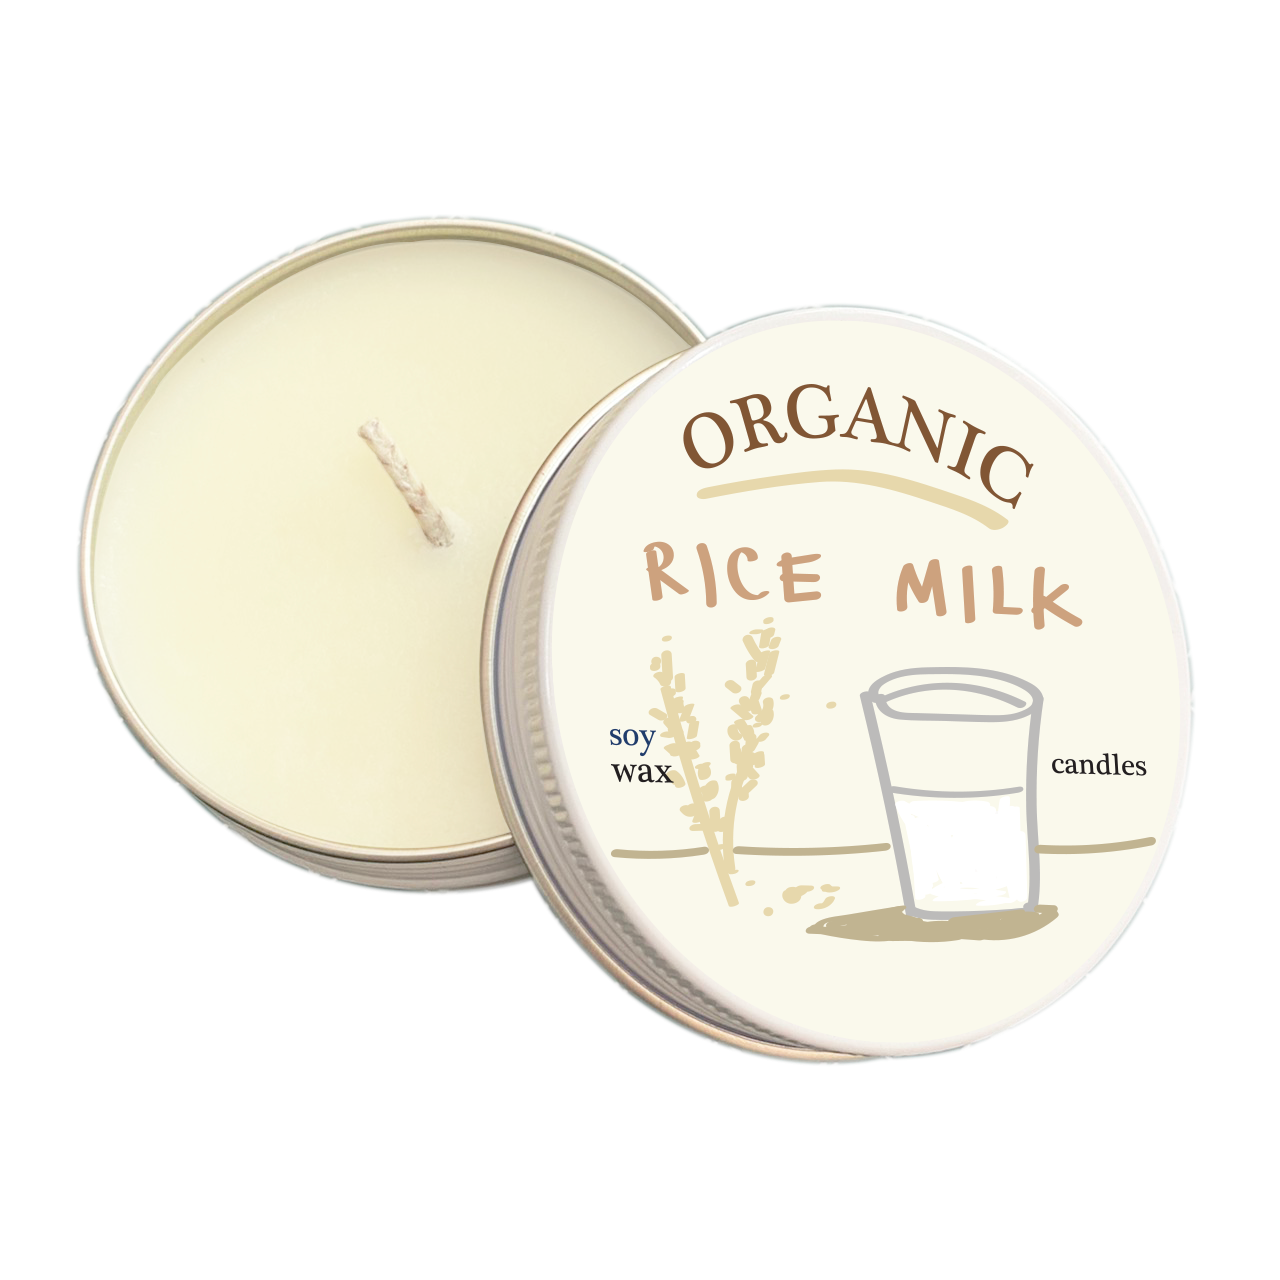 Rice Milk soy wax candles